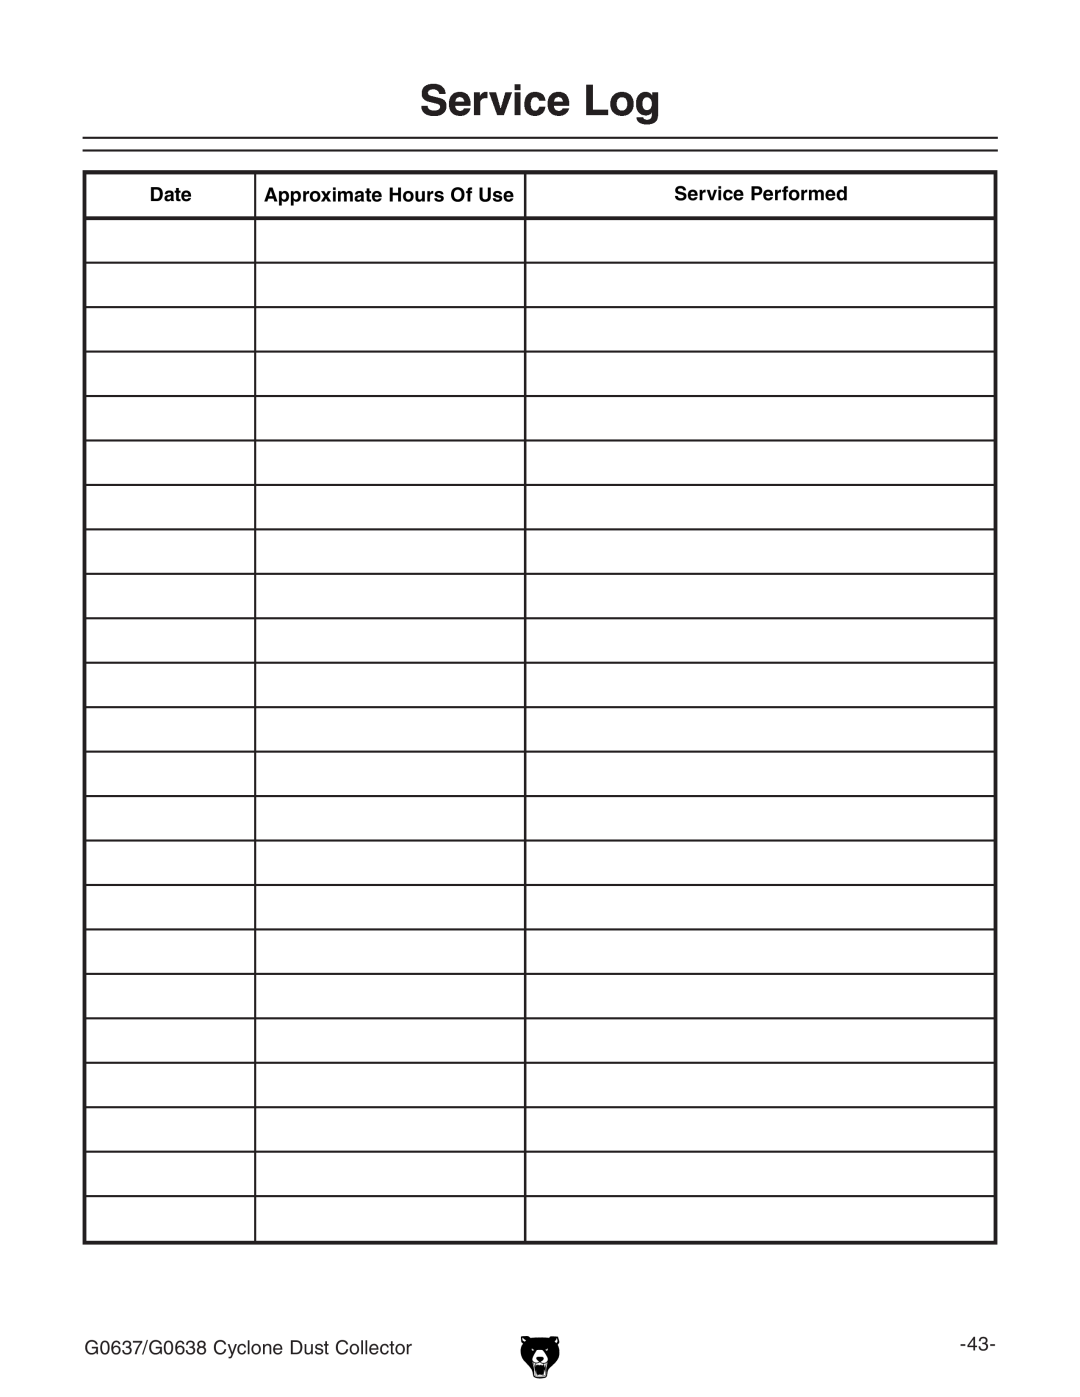 Grizzly G0638, G0637 owner manual Service Log, Date, Approximate Hours Of Use, Service Performed 